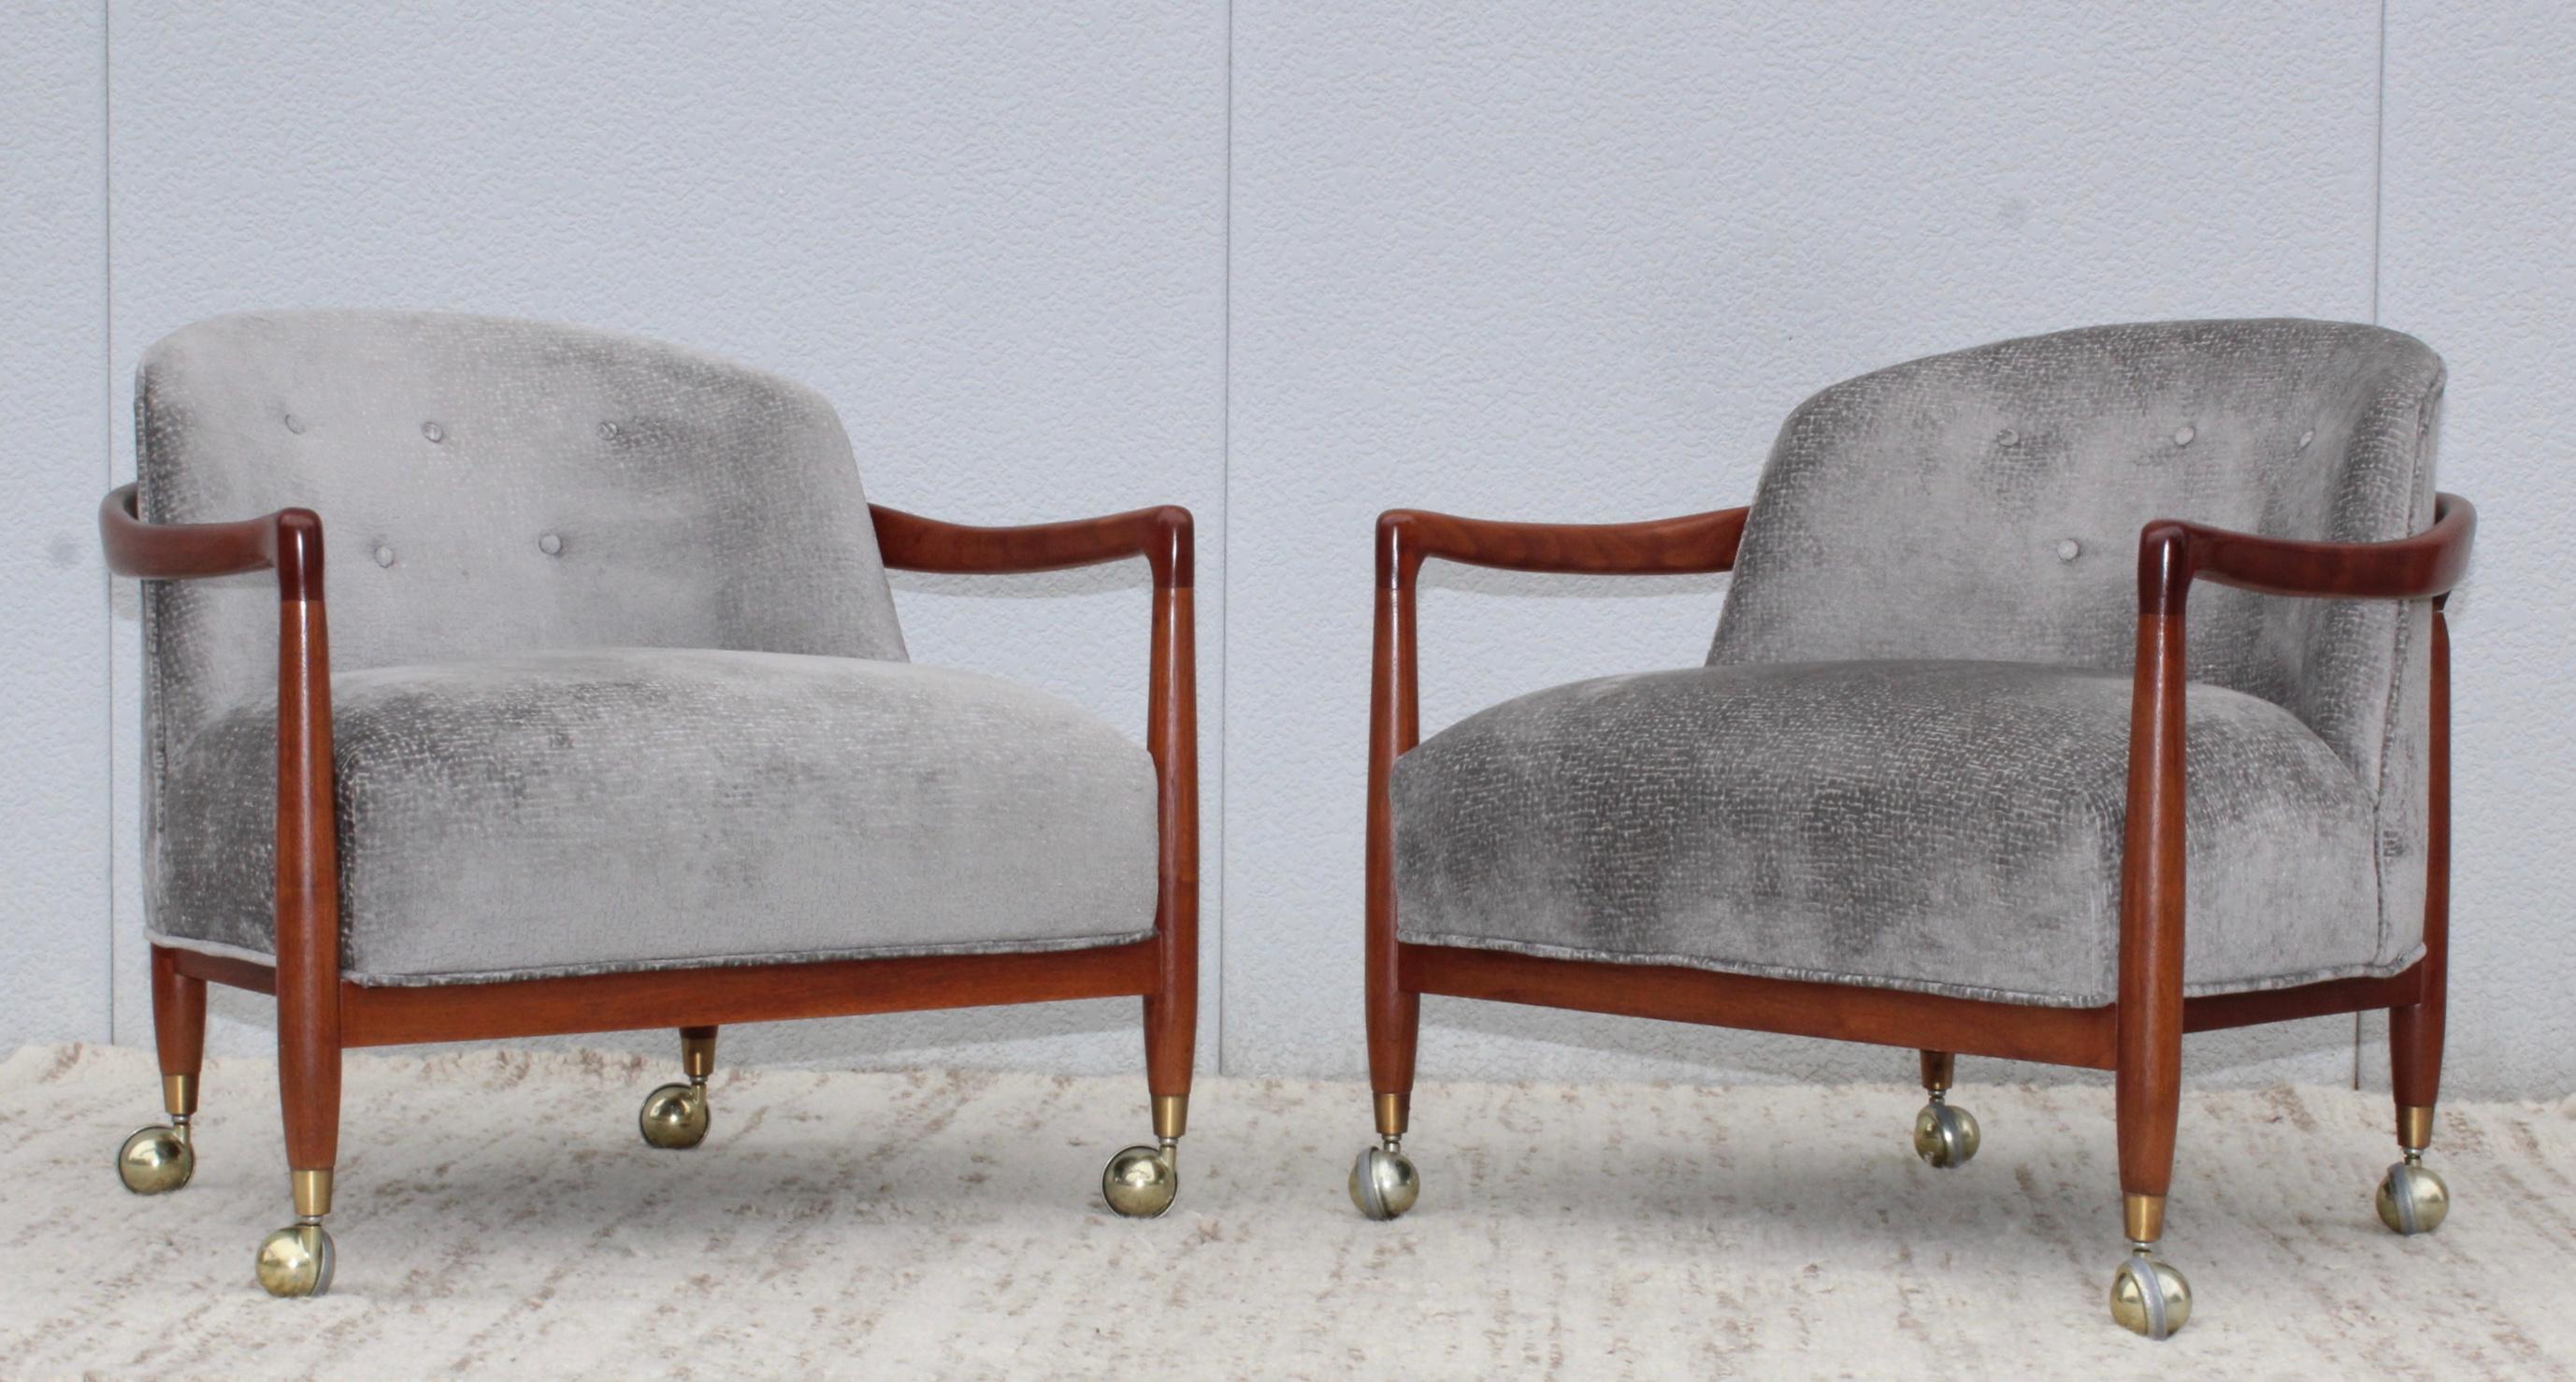 Stunning pair of 1960s Robsjohn-Gibbings designed for Widdicomb walnut lounge chairs on casters, refinished and newly reupholstered in velvet.